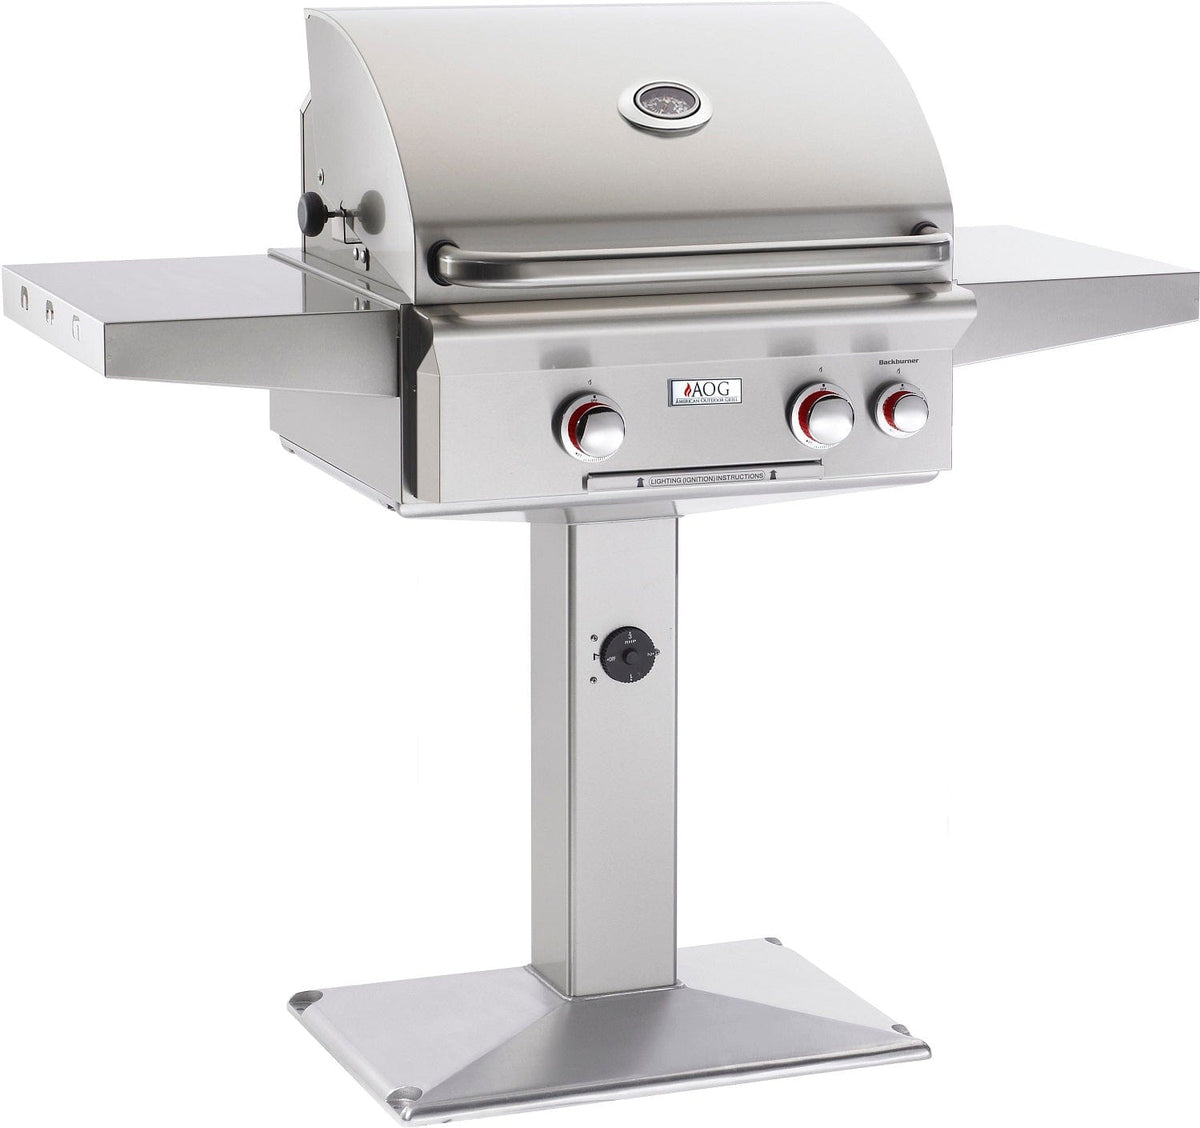 American Outdoor Grill Grills Patio Post Mount Grill American Outdoor Grill T-Series 24” Post Mount Gas Grill / Patio or In-Ground, Optional Sear Burner / 24NPT-00SP or 24NGT-00SP